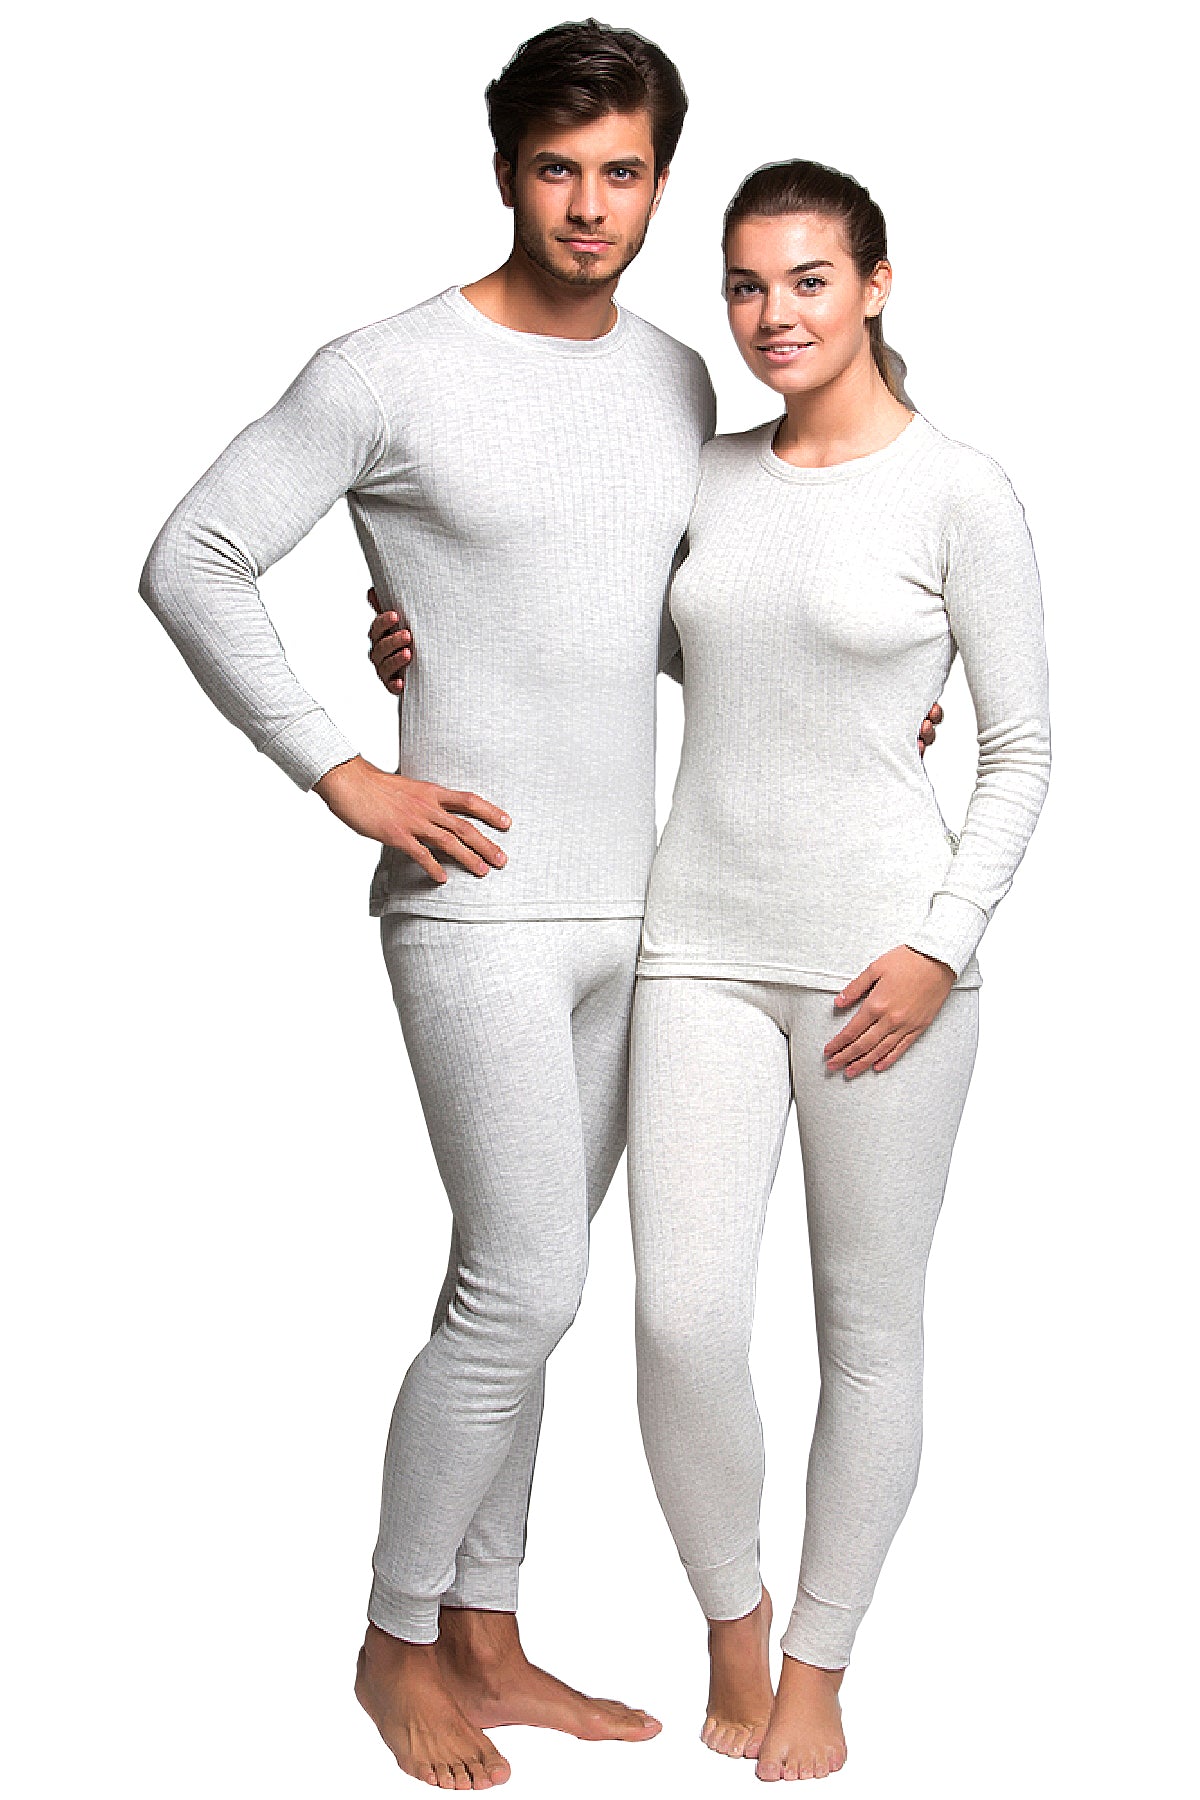 Wholesale waterproof long johns For Intimate Warmth And Comfort